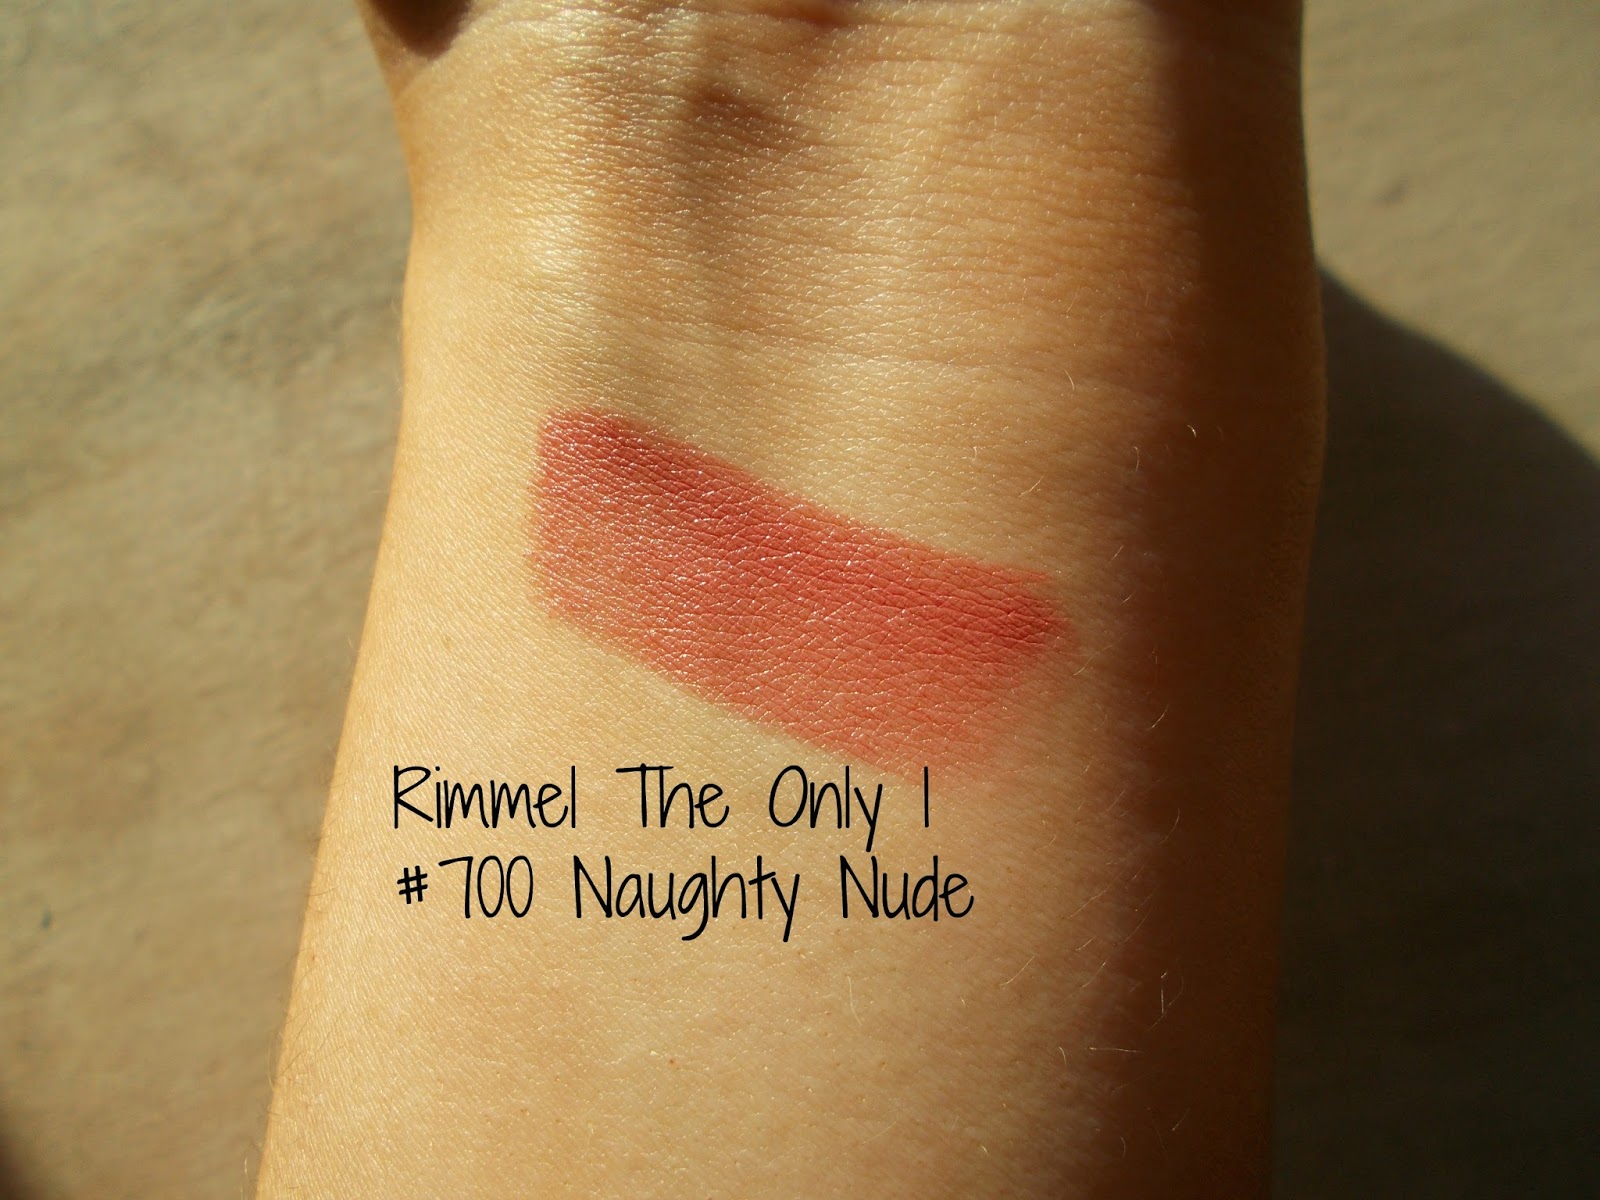 Rimmel The Only 1 lipstick 700 Naughty Nude swatch